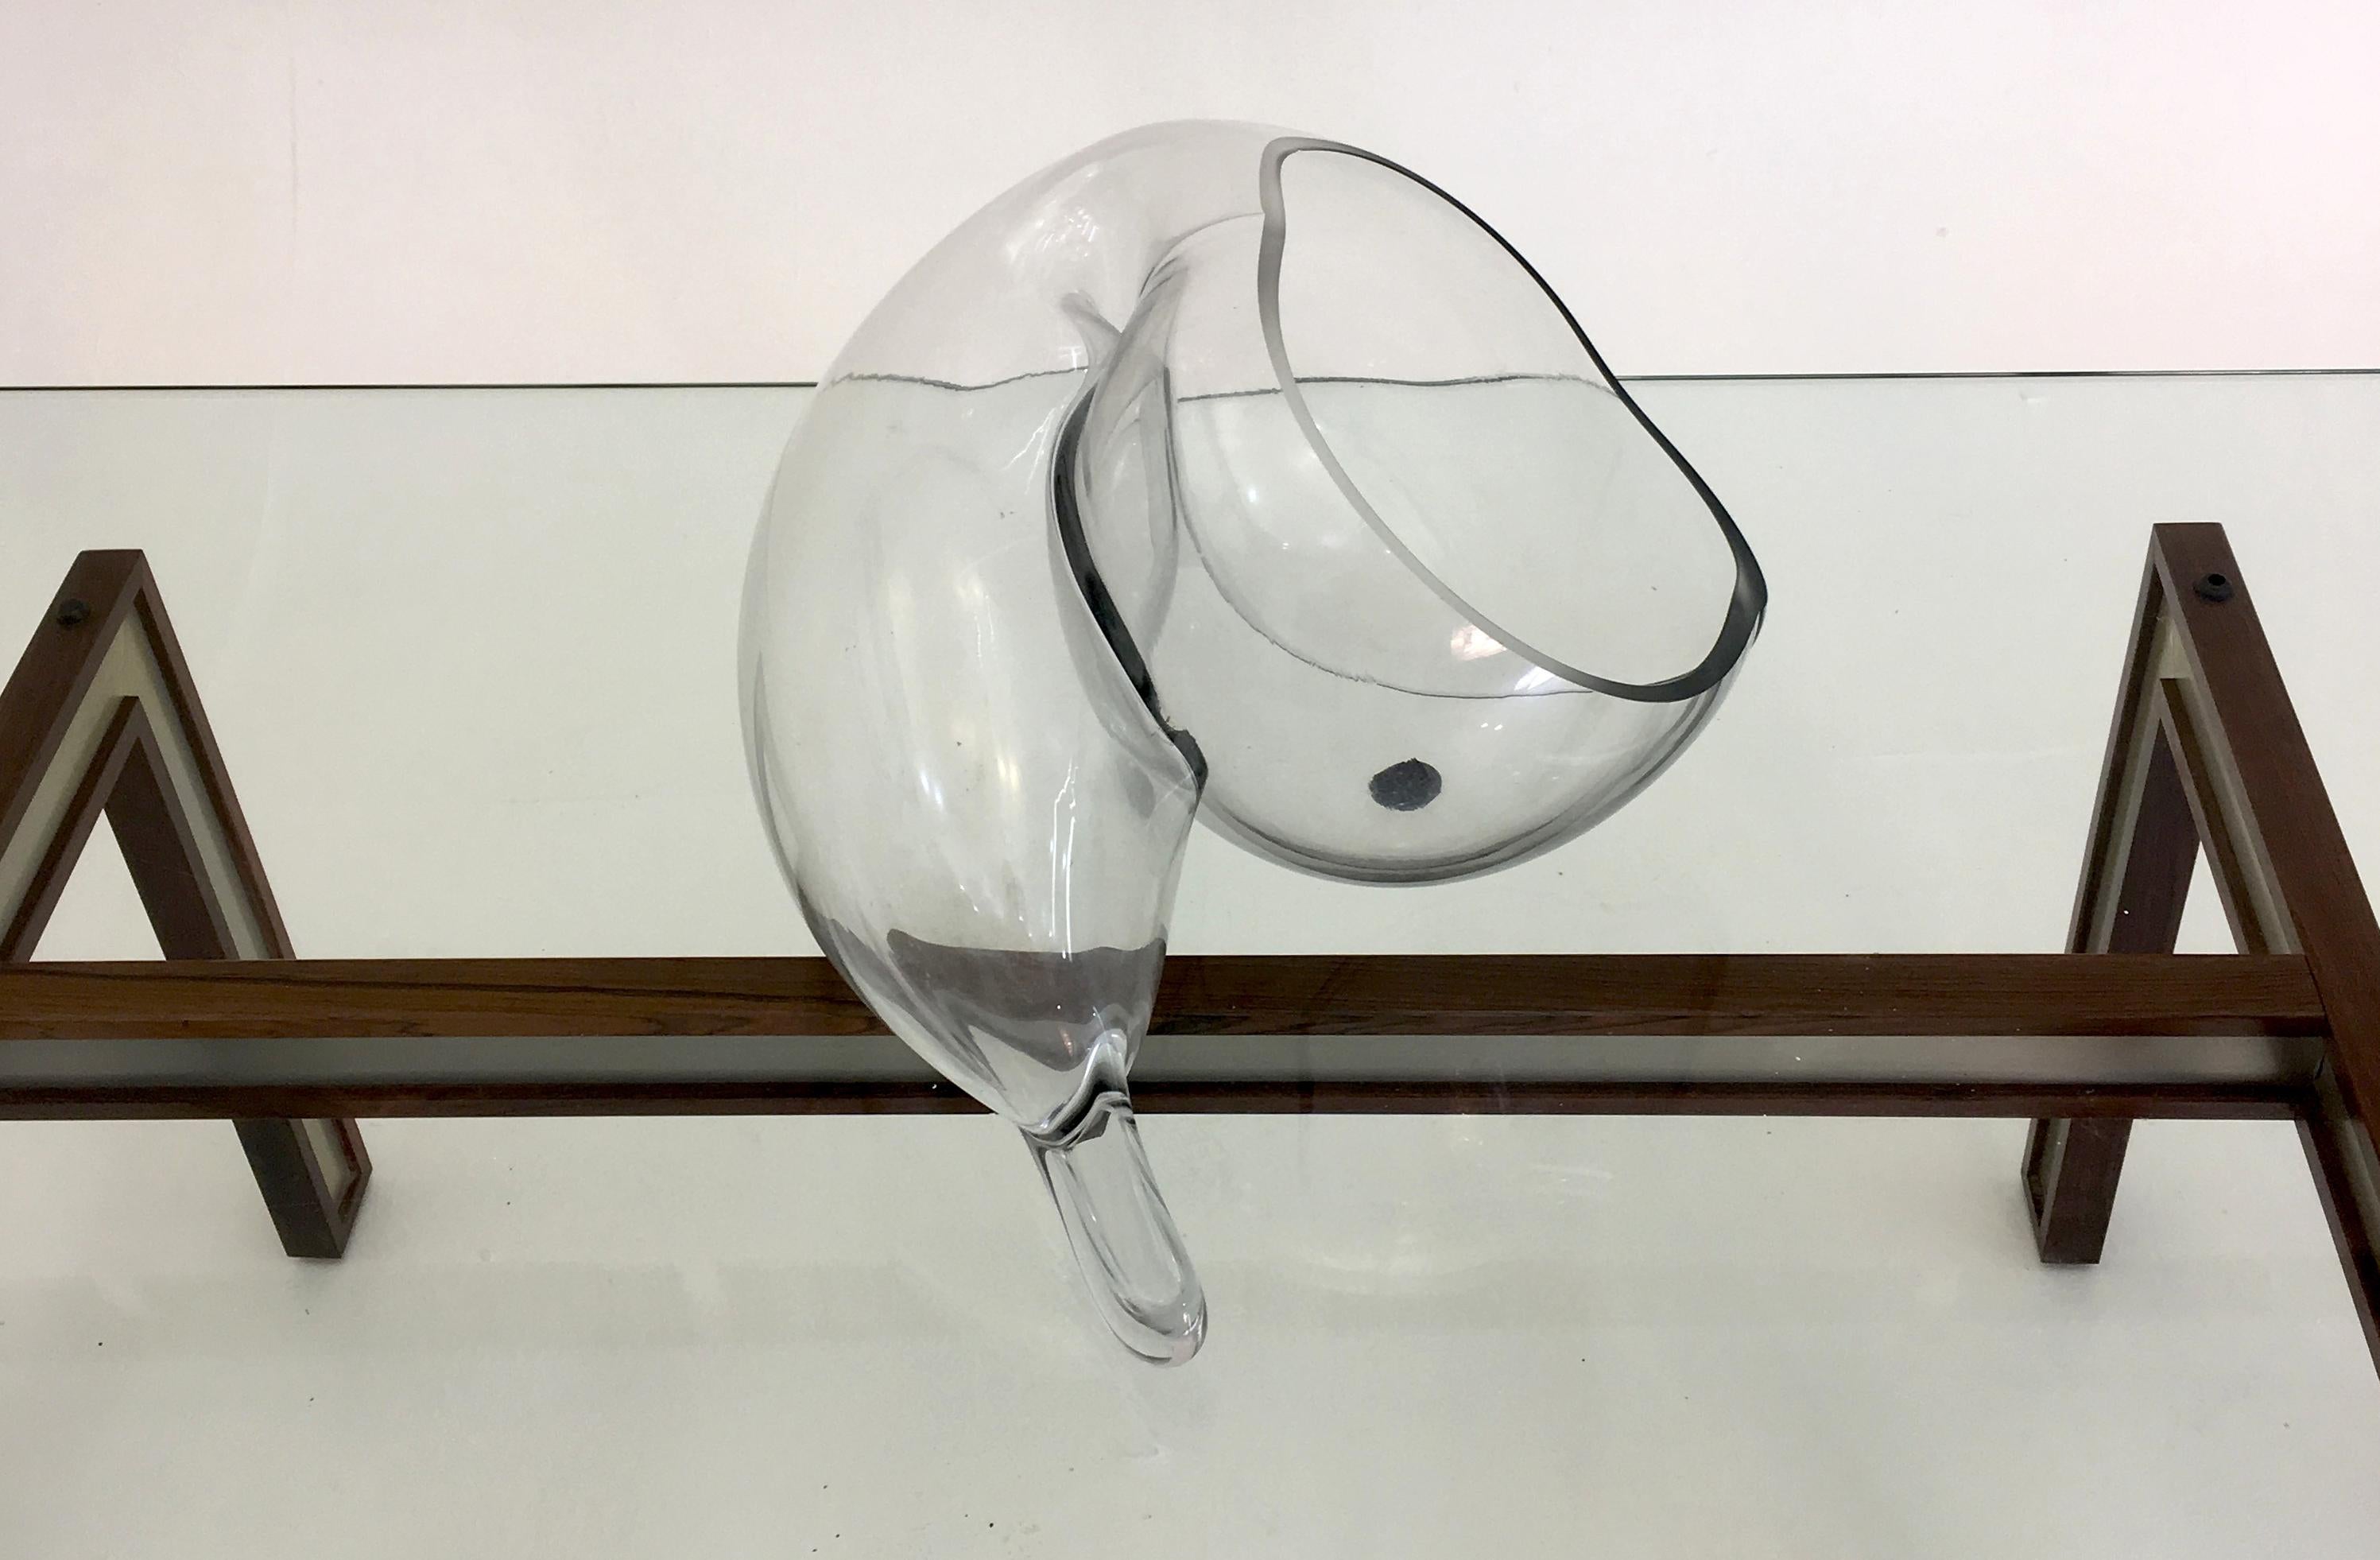 John Bingham, Glassblower, Artist
circa 1980
Handblown glass Santa Fe, New Mexico, USA
Measures: 8 tall x 17 wide x 13 inches deep.

One of 2 pieces by this artist we have listed. We have a small and a large available. Hand blown free form